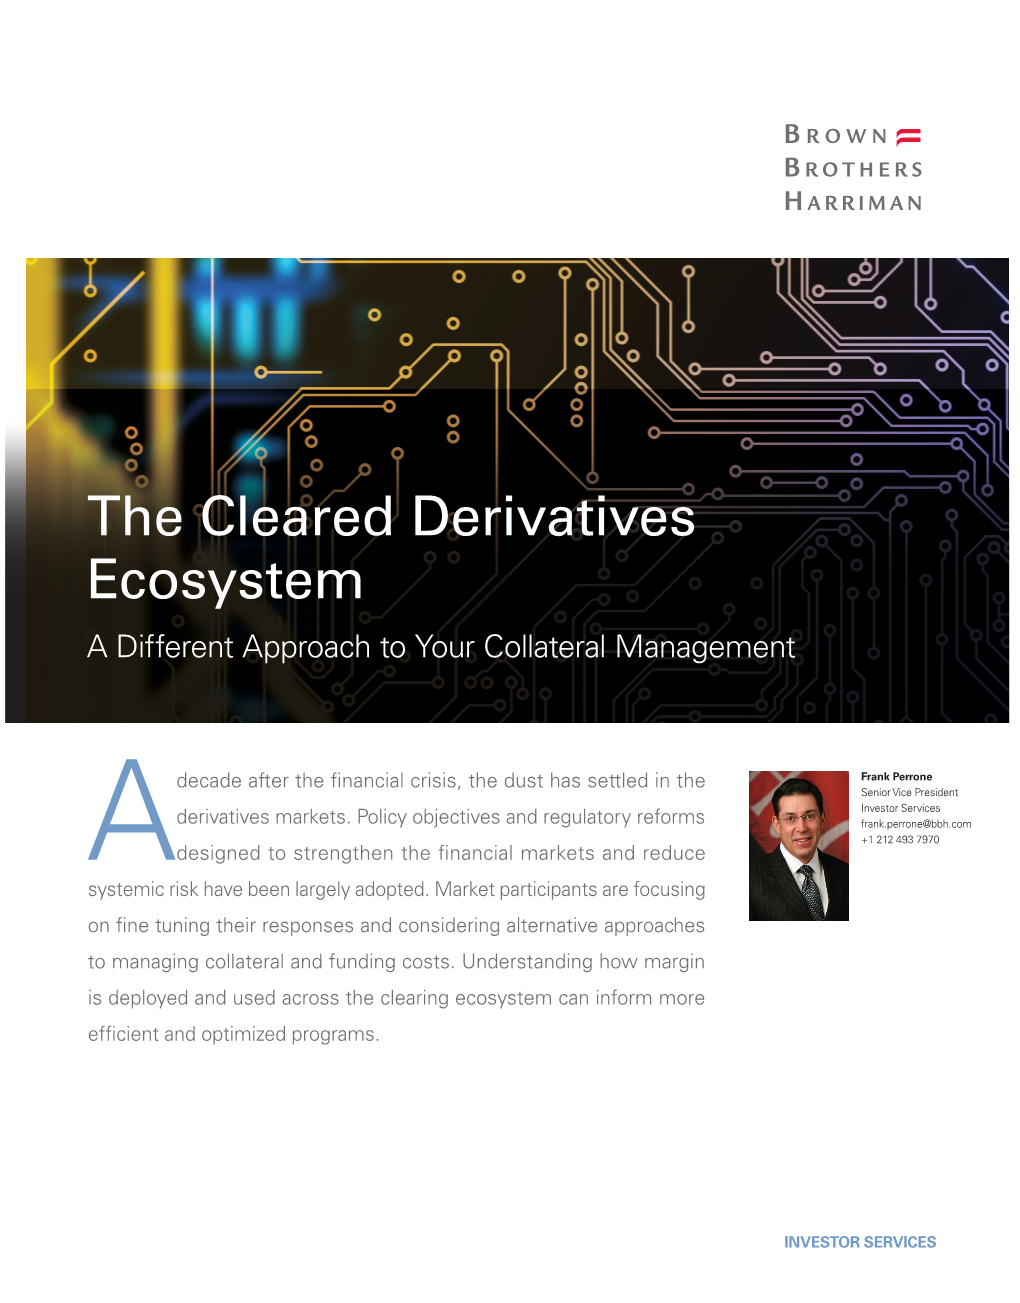 The Cleared Derivatives Ecosystem a Different Approach to Your Collateral Management